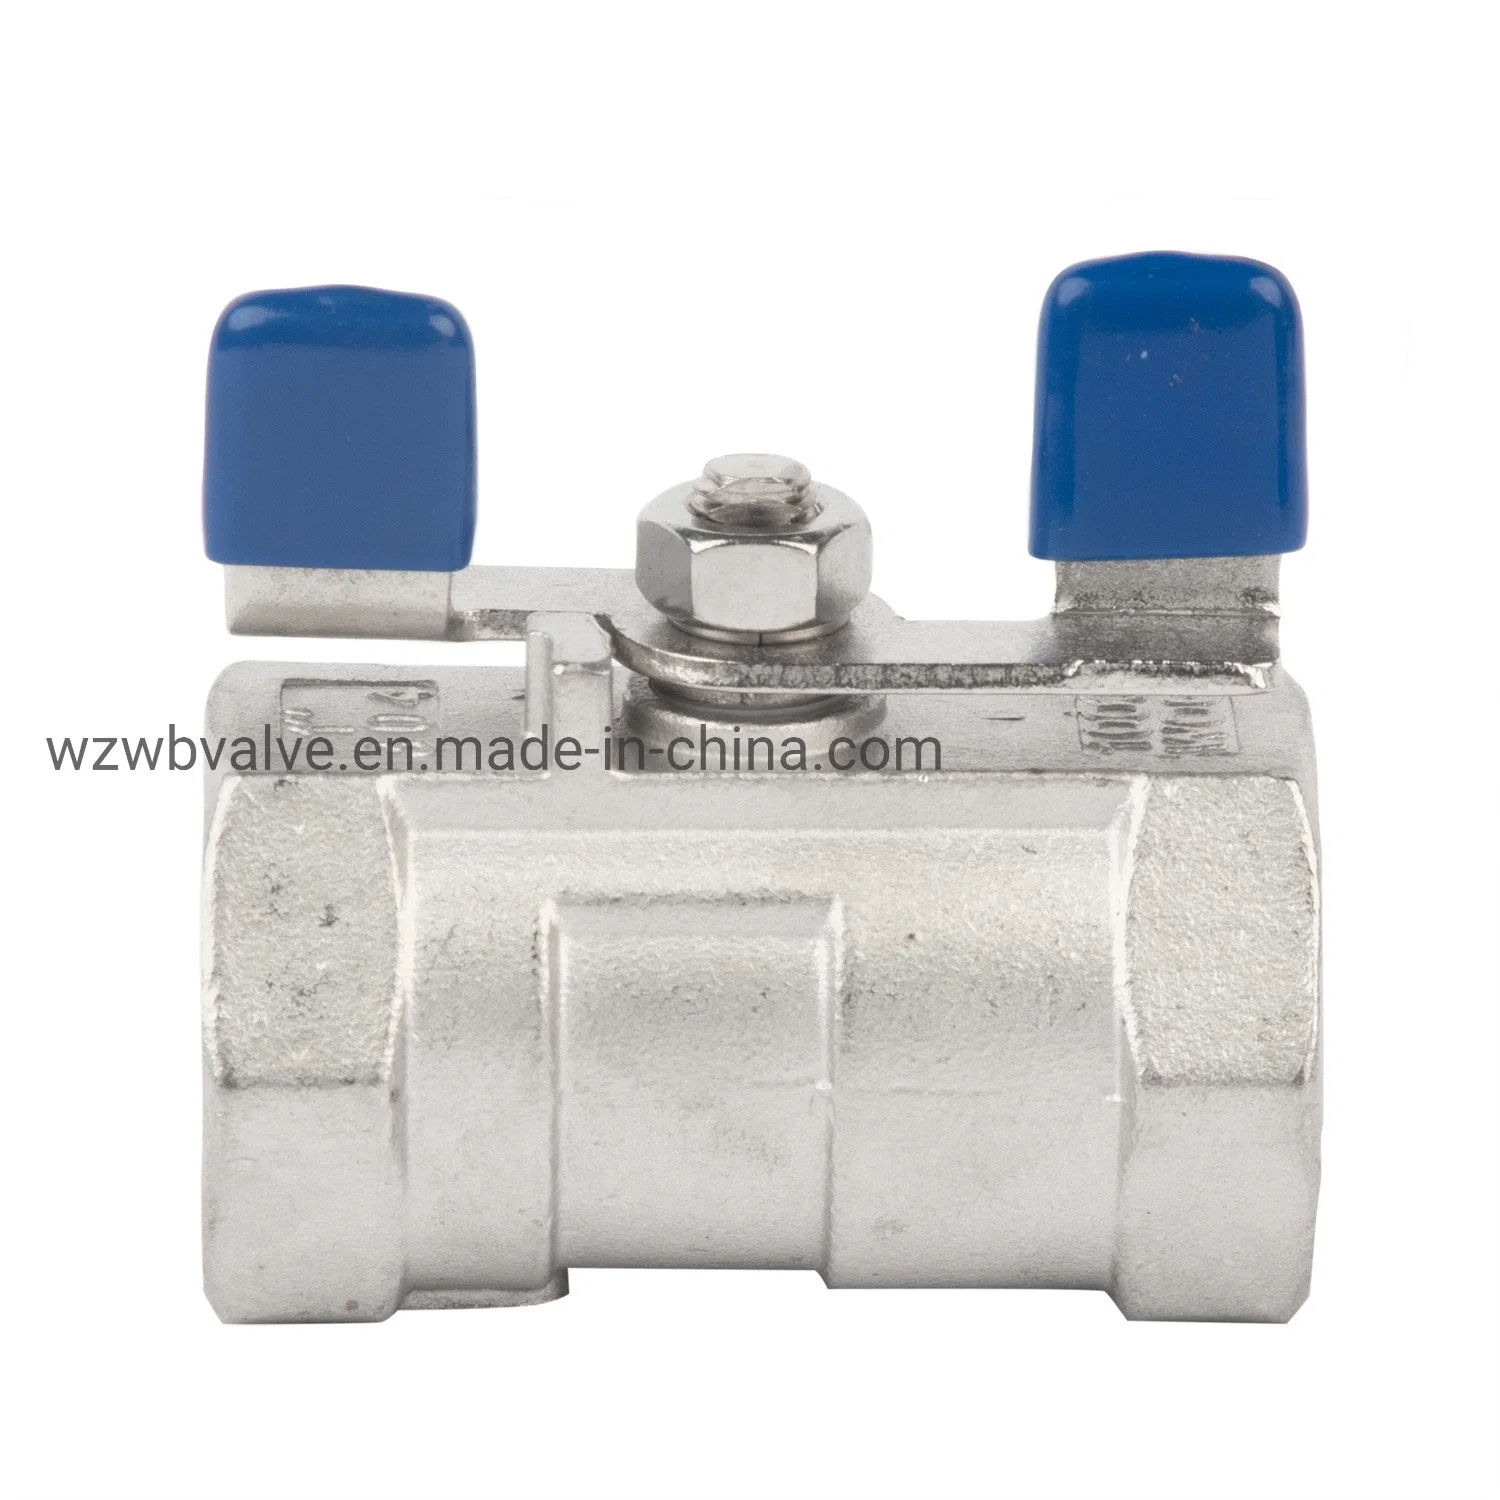 One Piece (1PC) Ball Valve with Butterfly Hand Lever